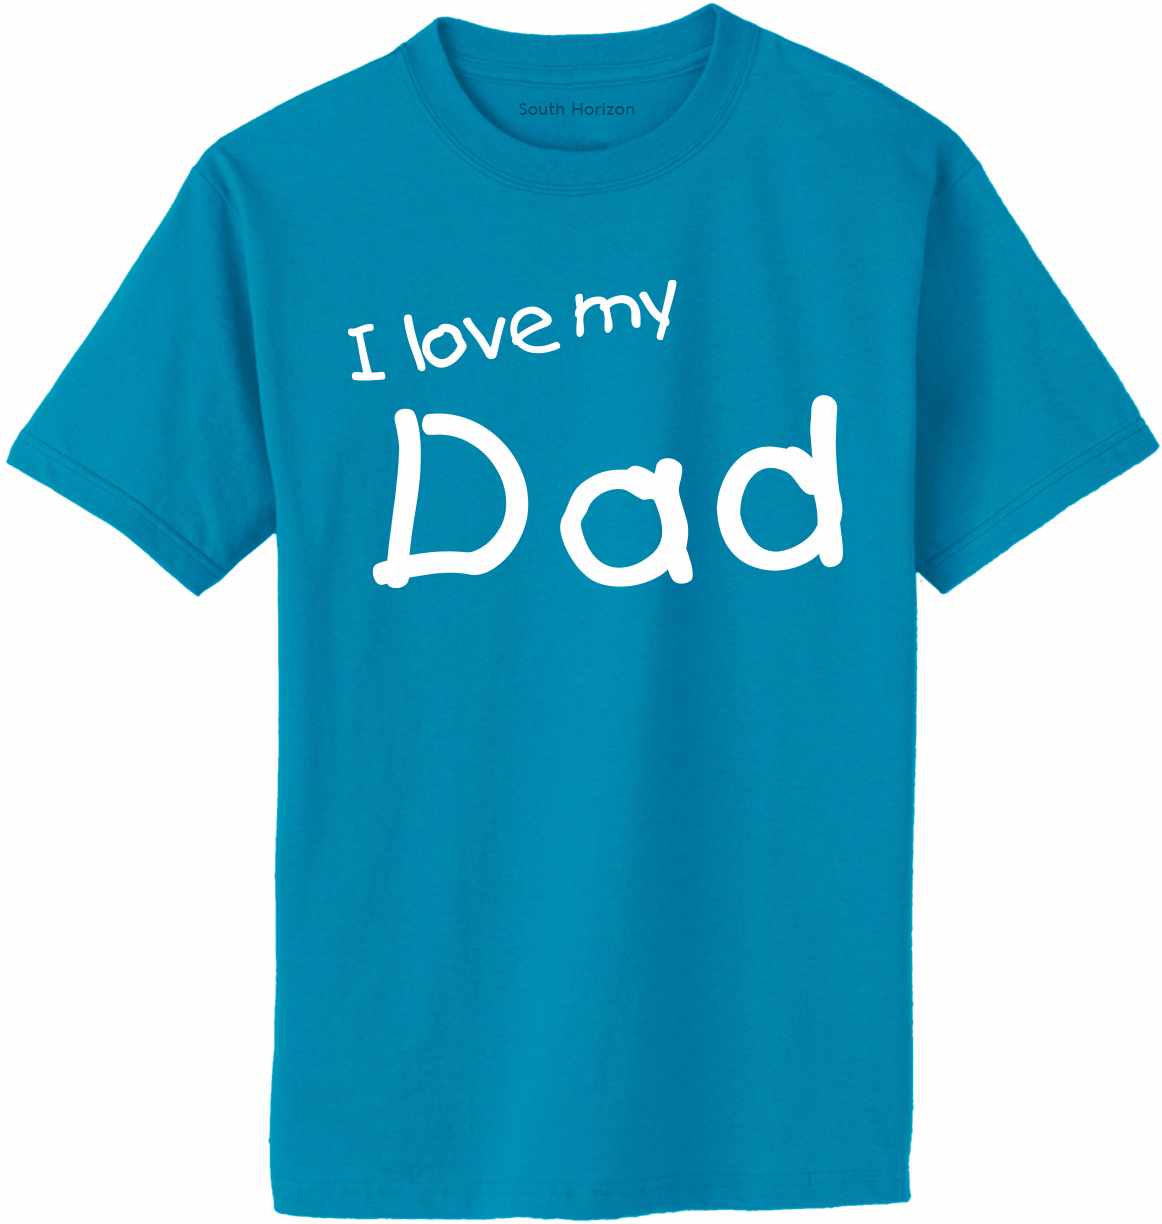 I Love My Dad on Adult T-Shirt (#1210-1)